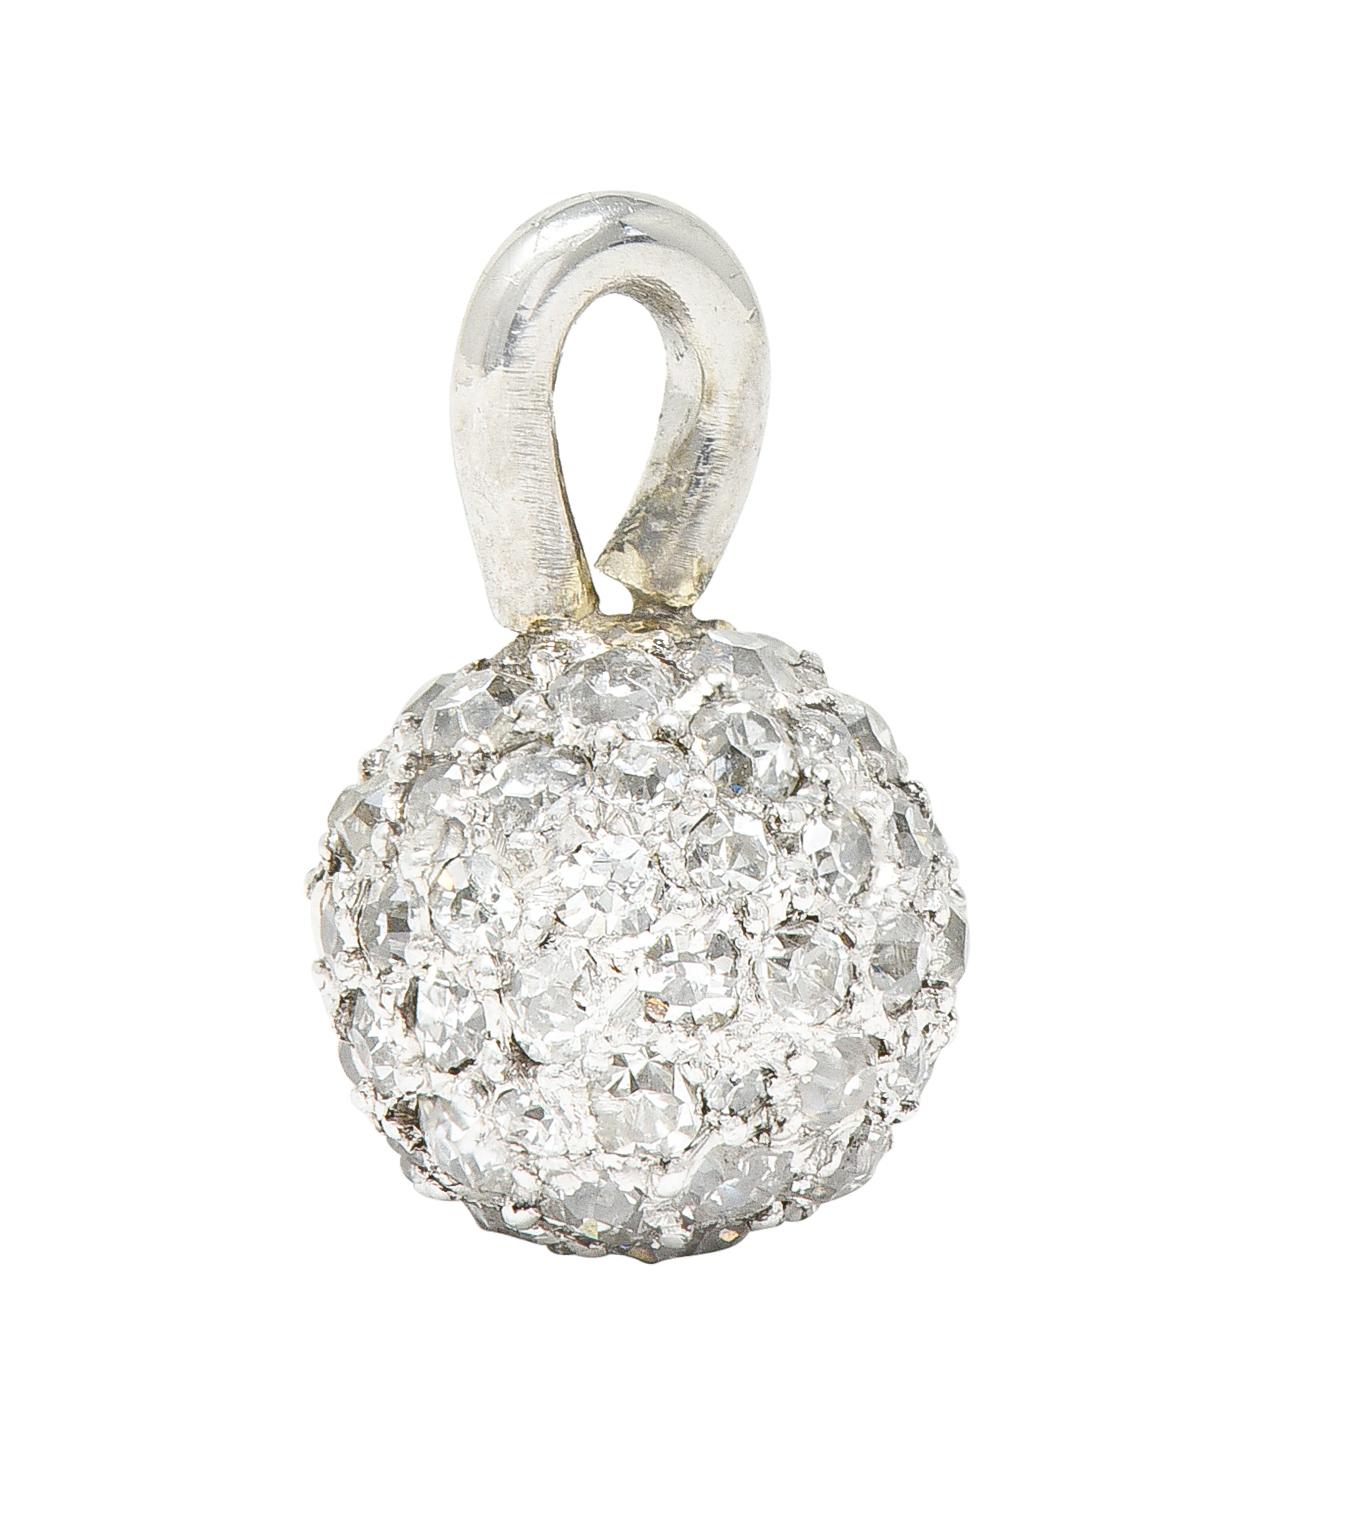 Petite charm is designed as a platinum ball. Pavé set fully around with old single and single cut diamonds. Weighing in total approximately 1.00 carat. Quality consistent with age and cut. Tested as platinum. Circa: 1910. Measures: 5/16 x 1/2 inch.